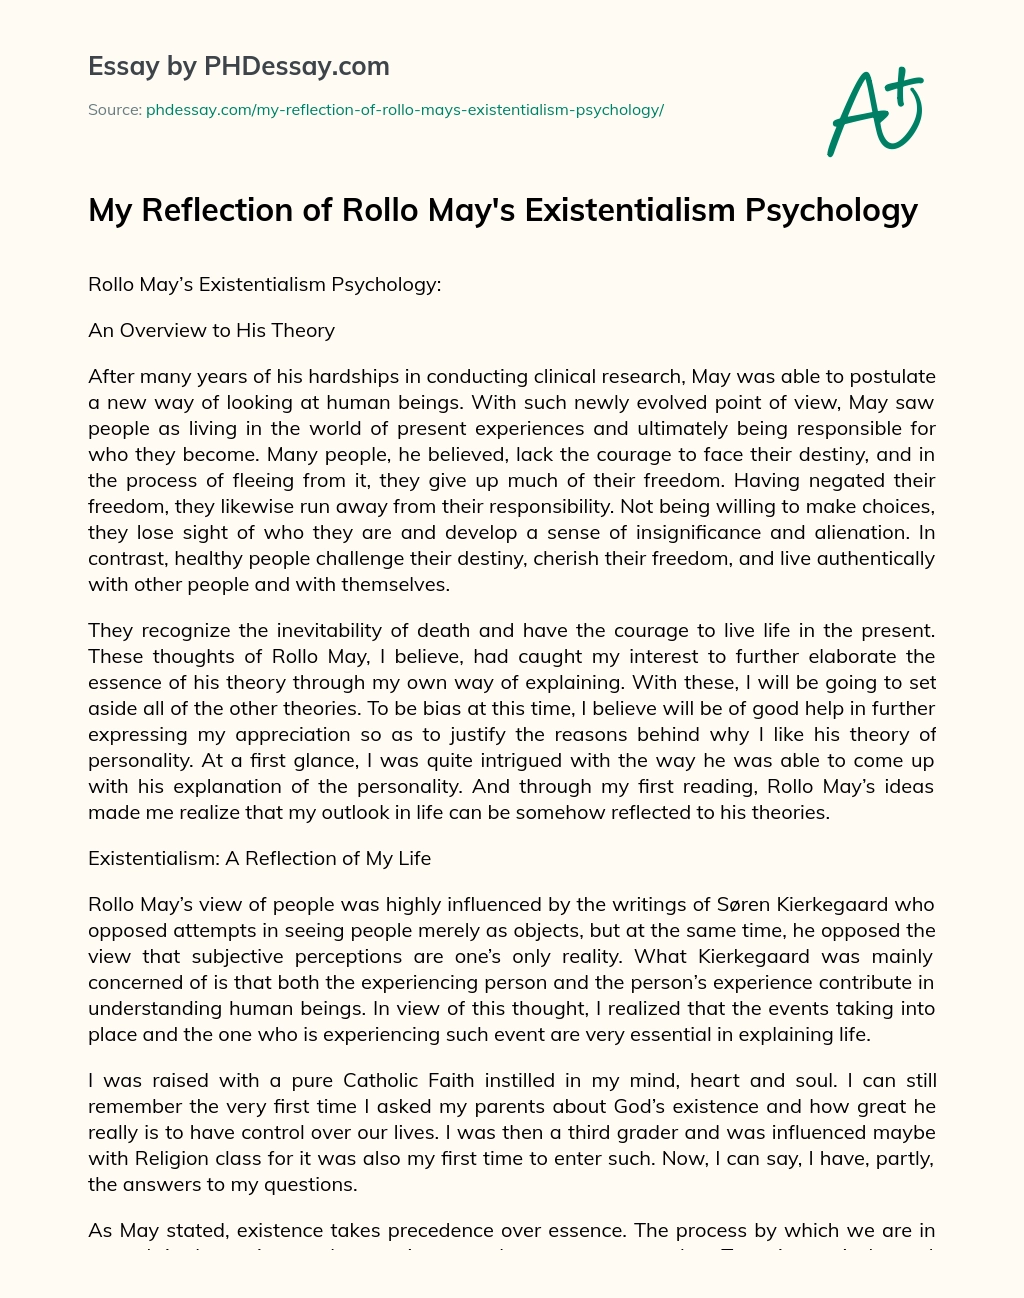 My Reflection of Rollo May’s Existentialism Psychology essay